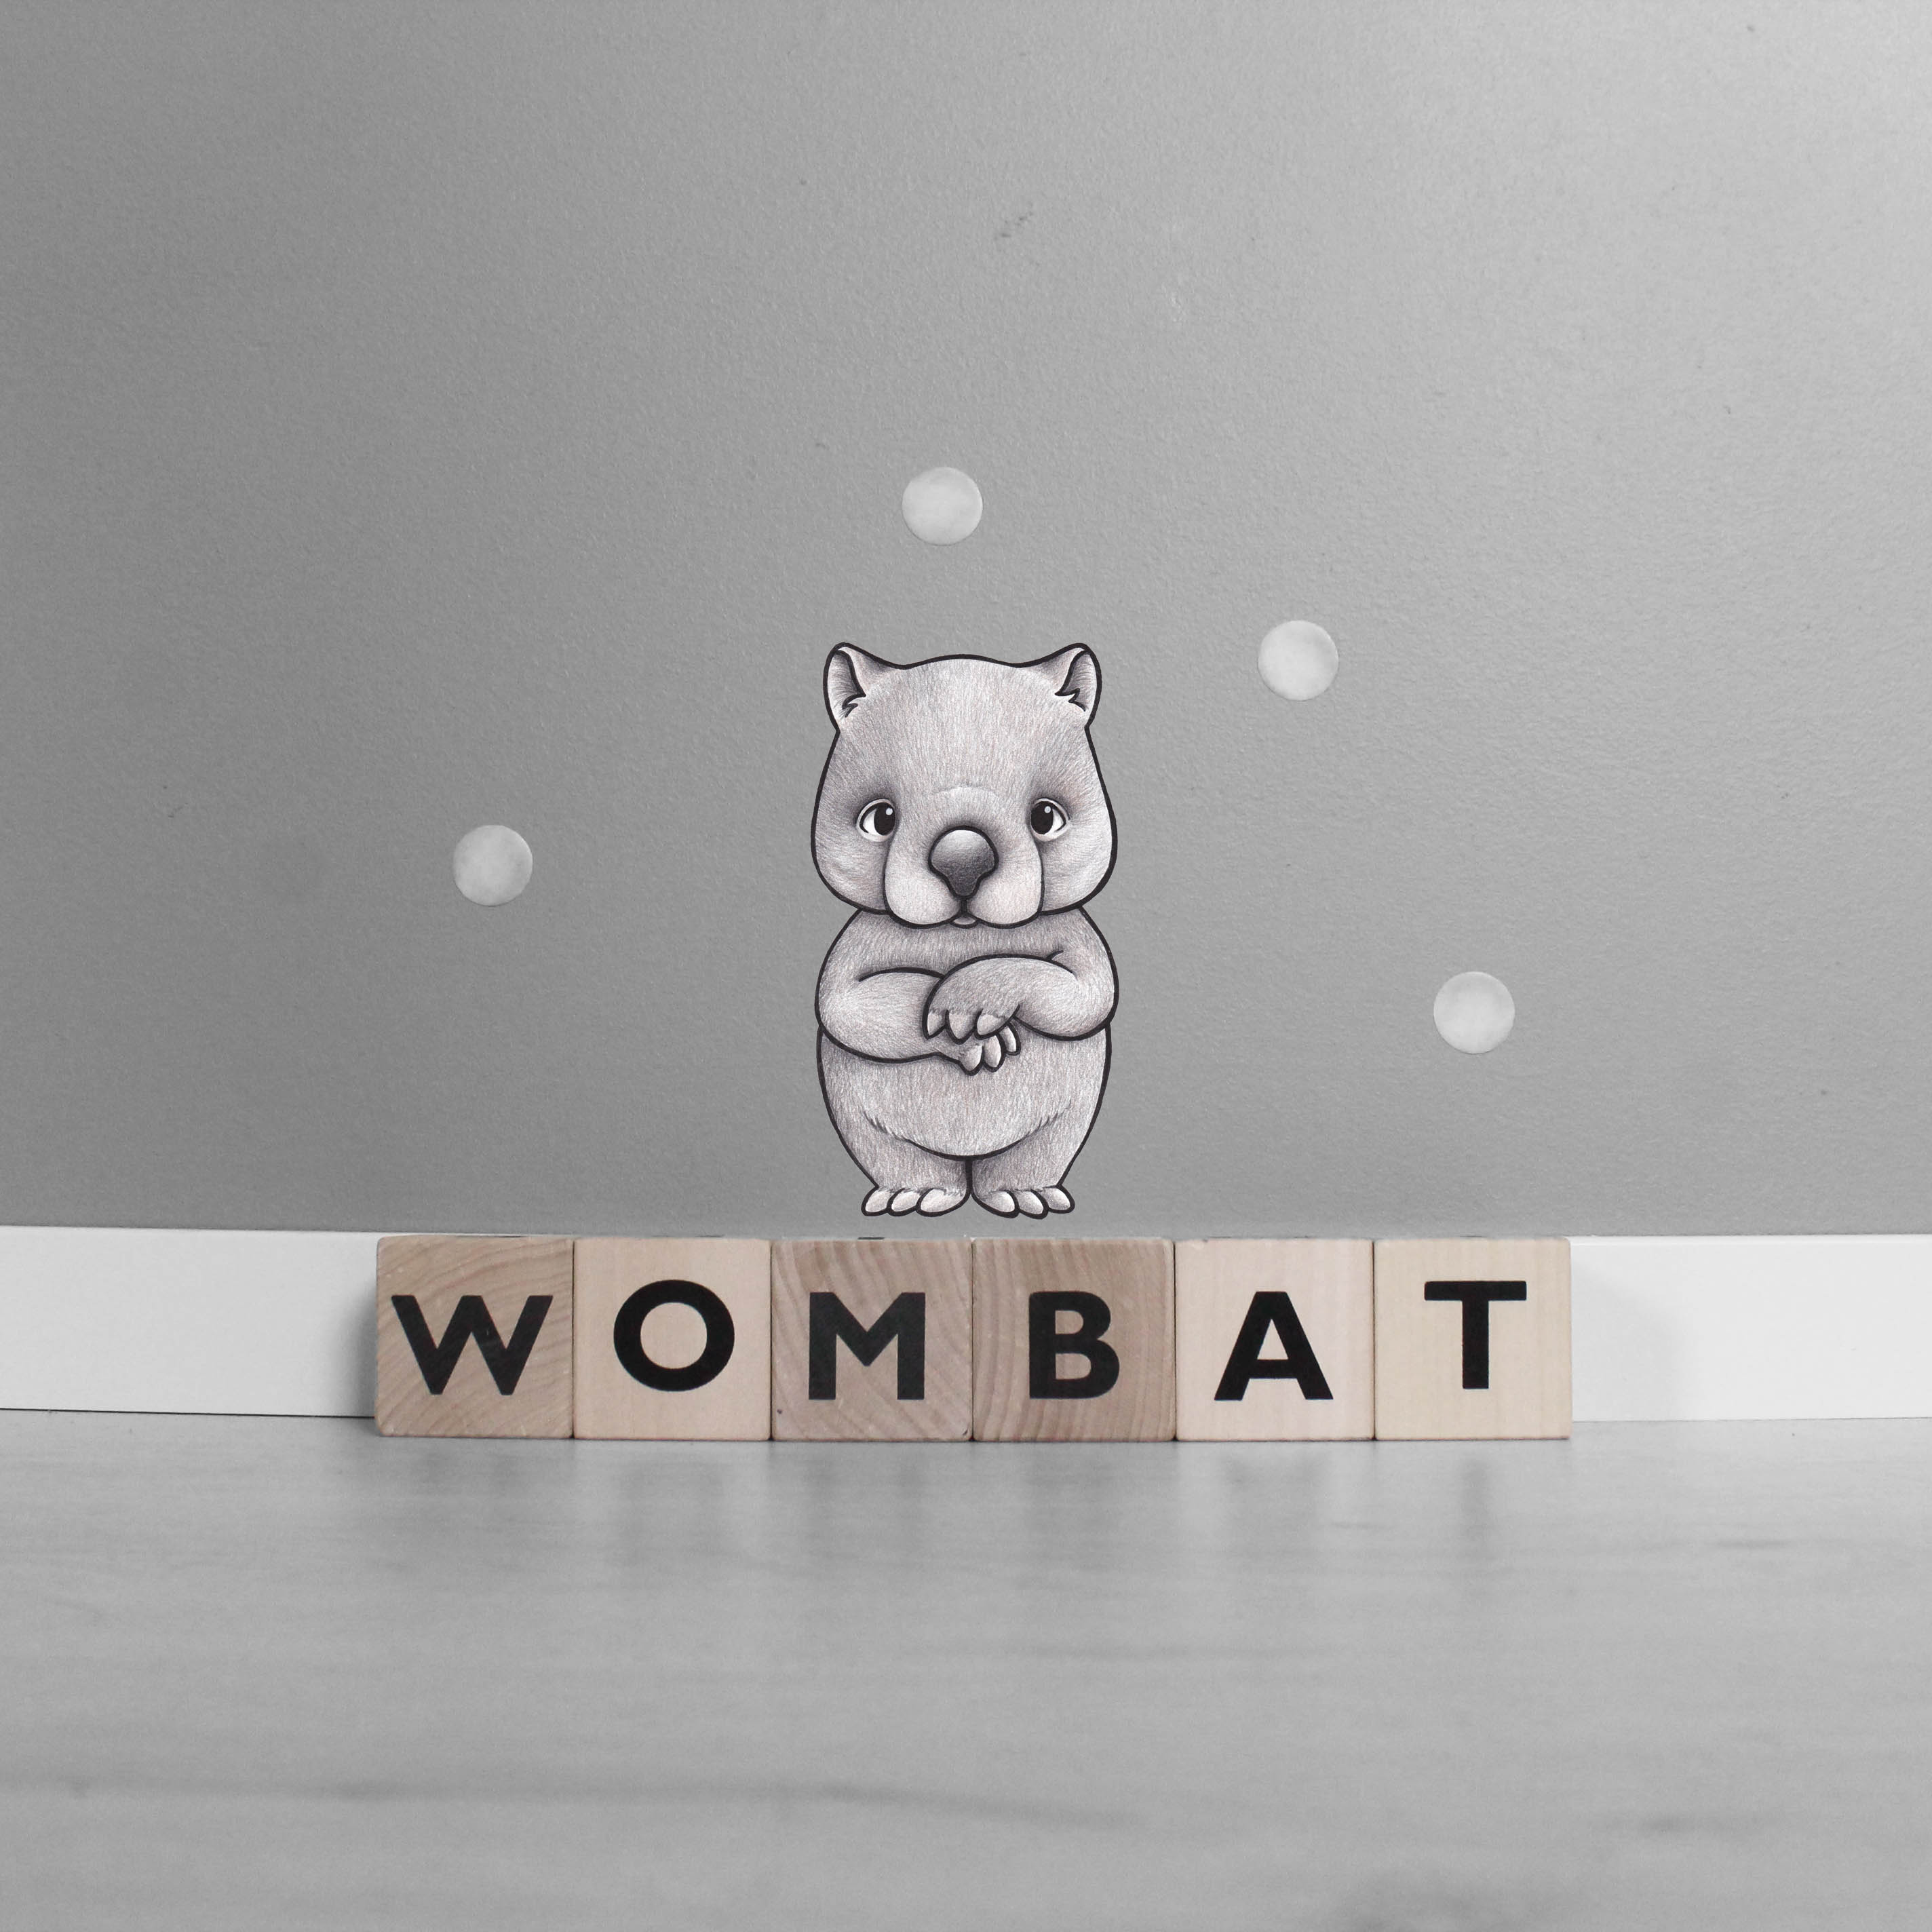 The wilderness was home to a wombat